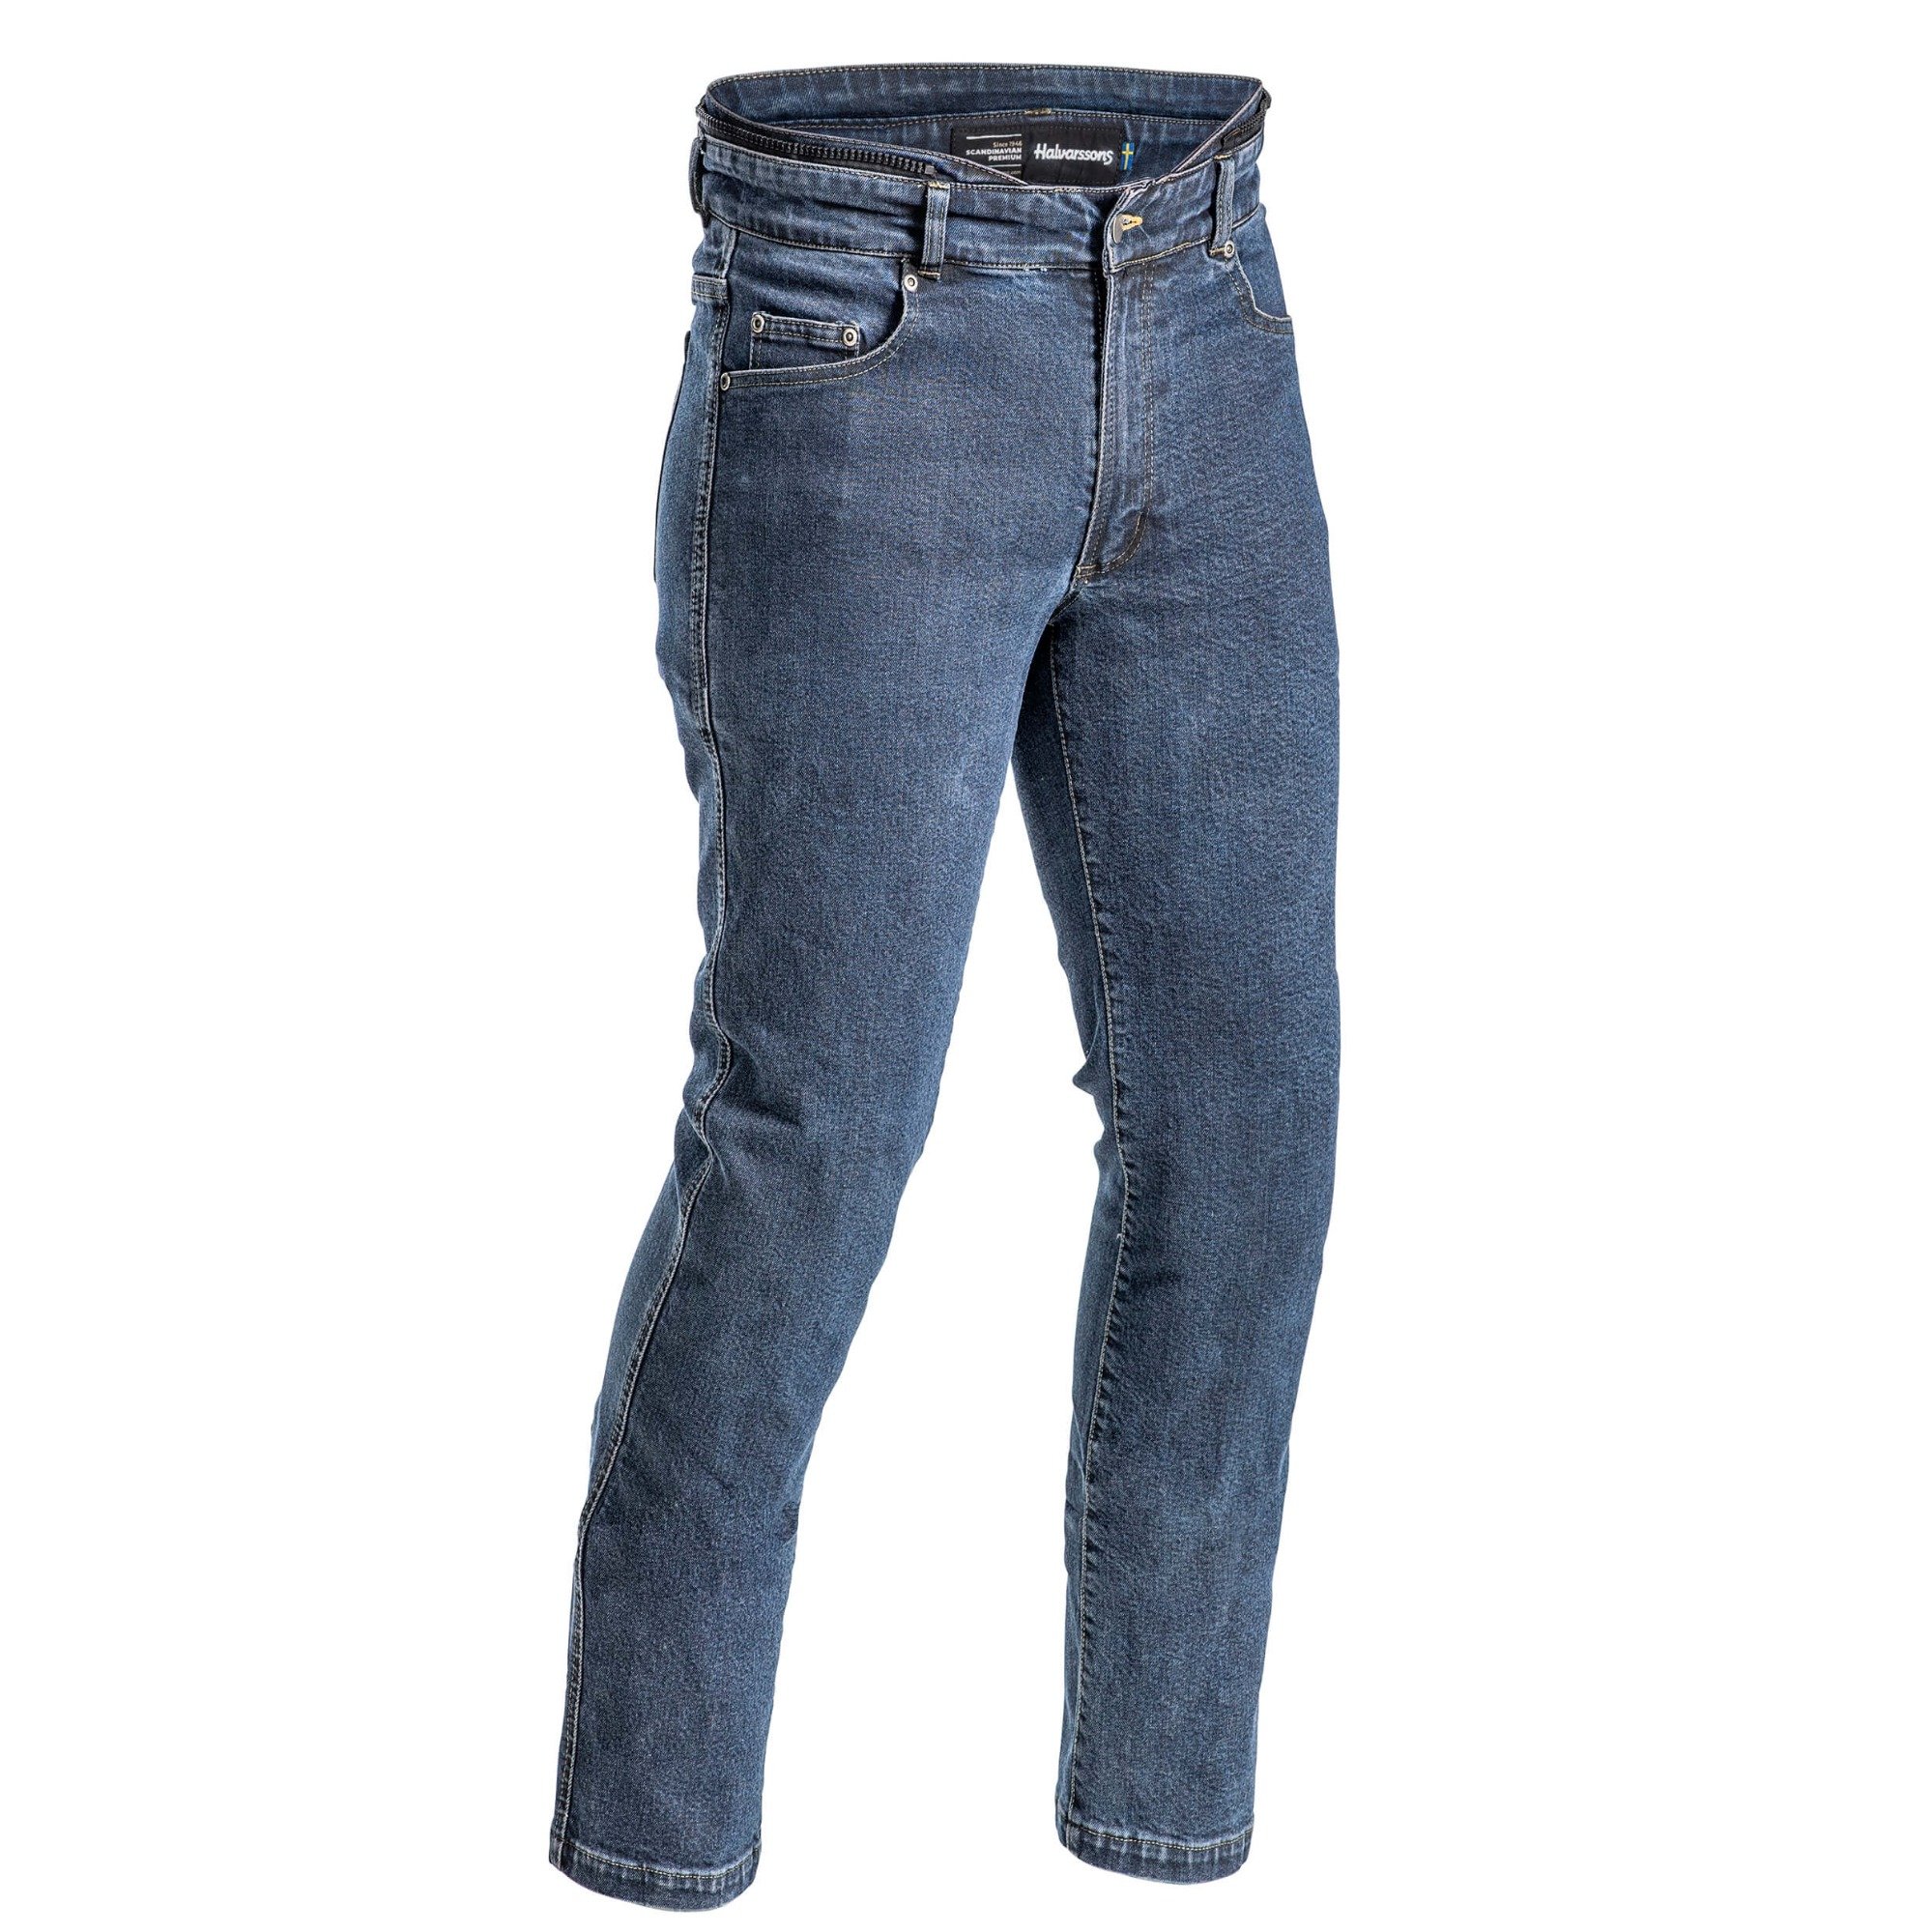 Image of Halvarssons Jeans Rogen Blue Size 52 ID 6438235238976